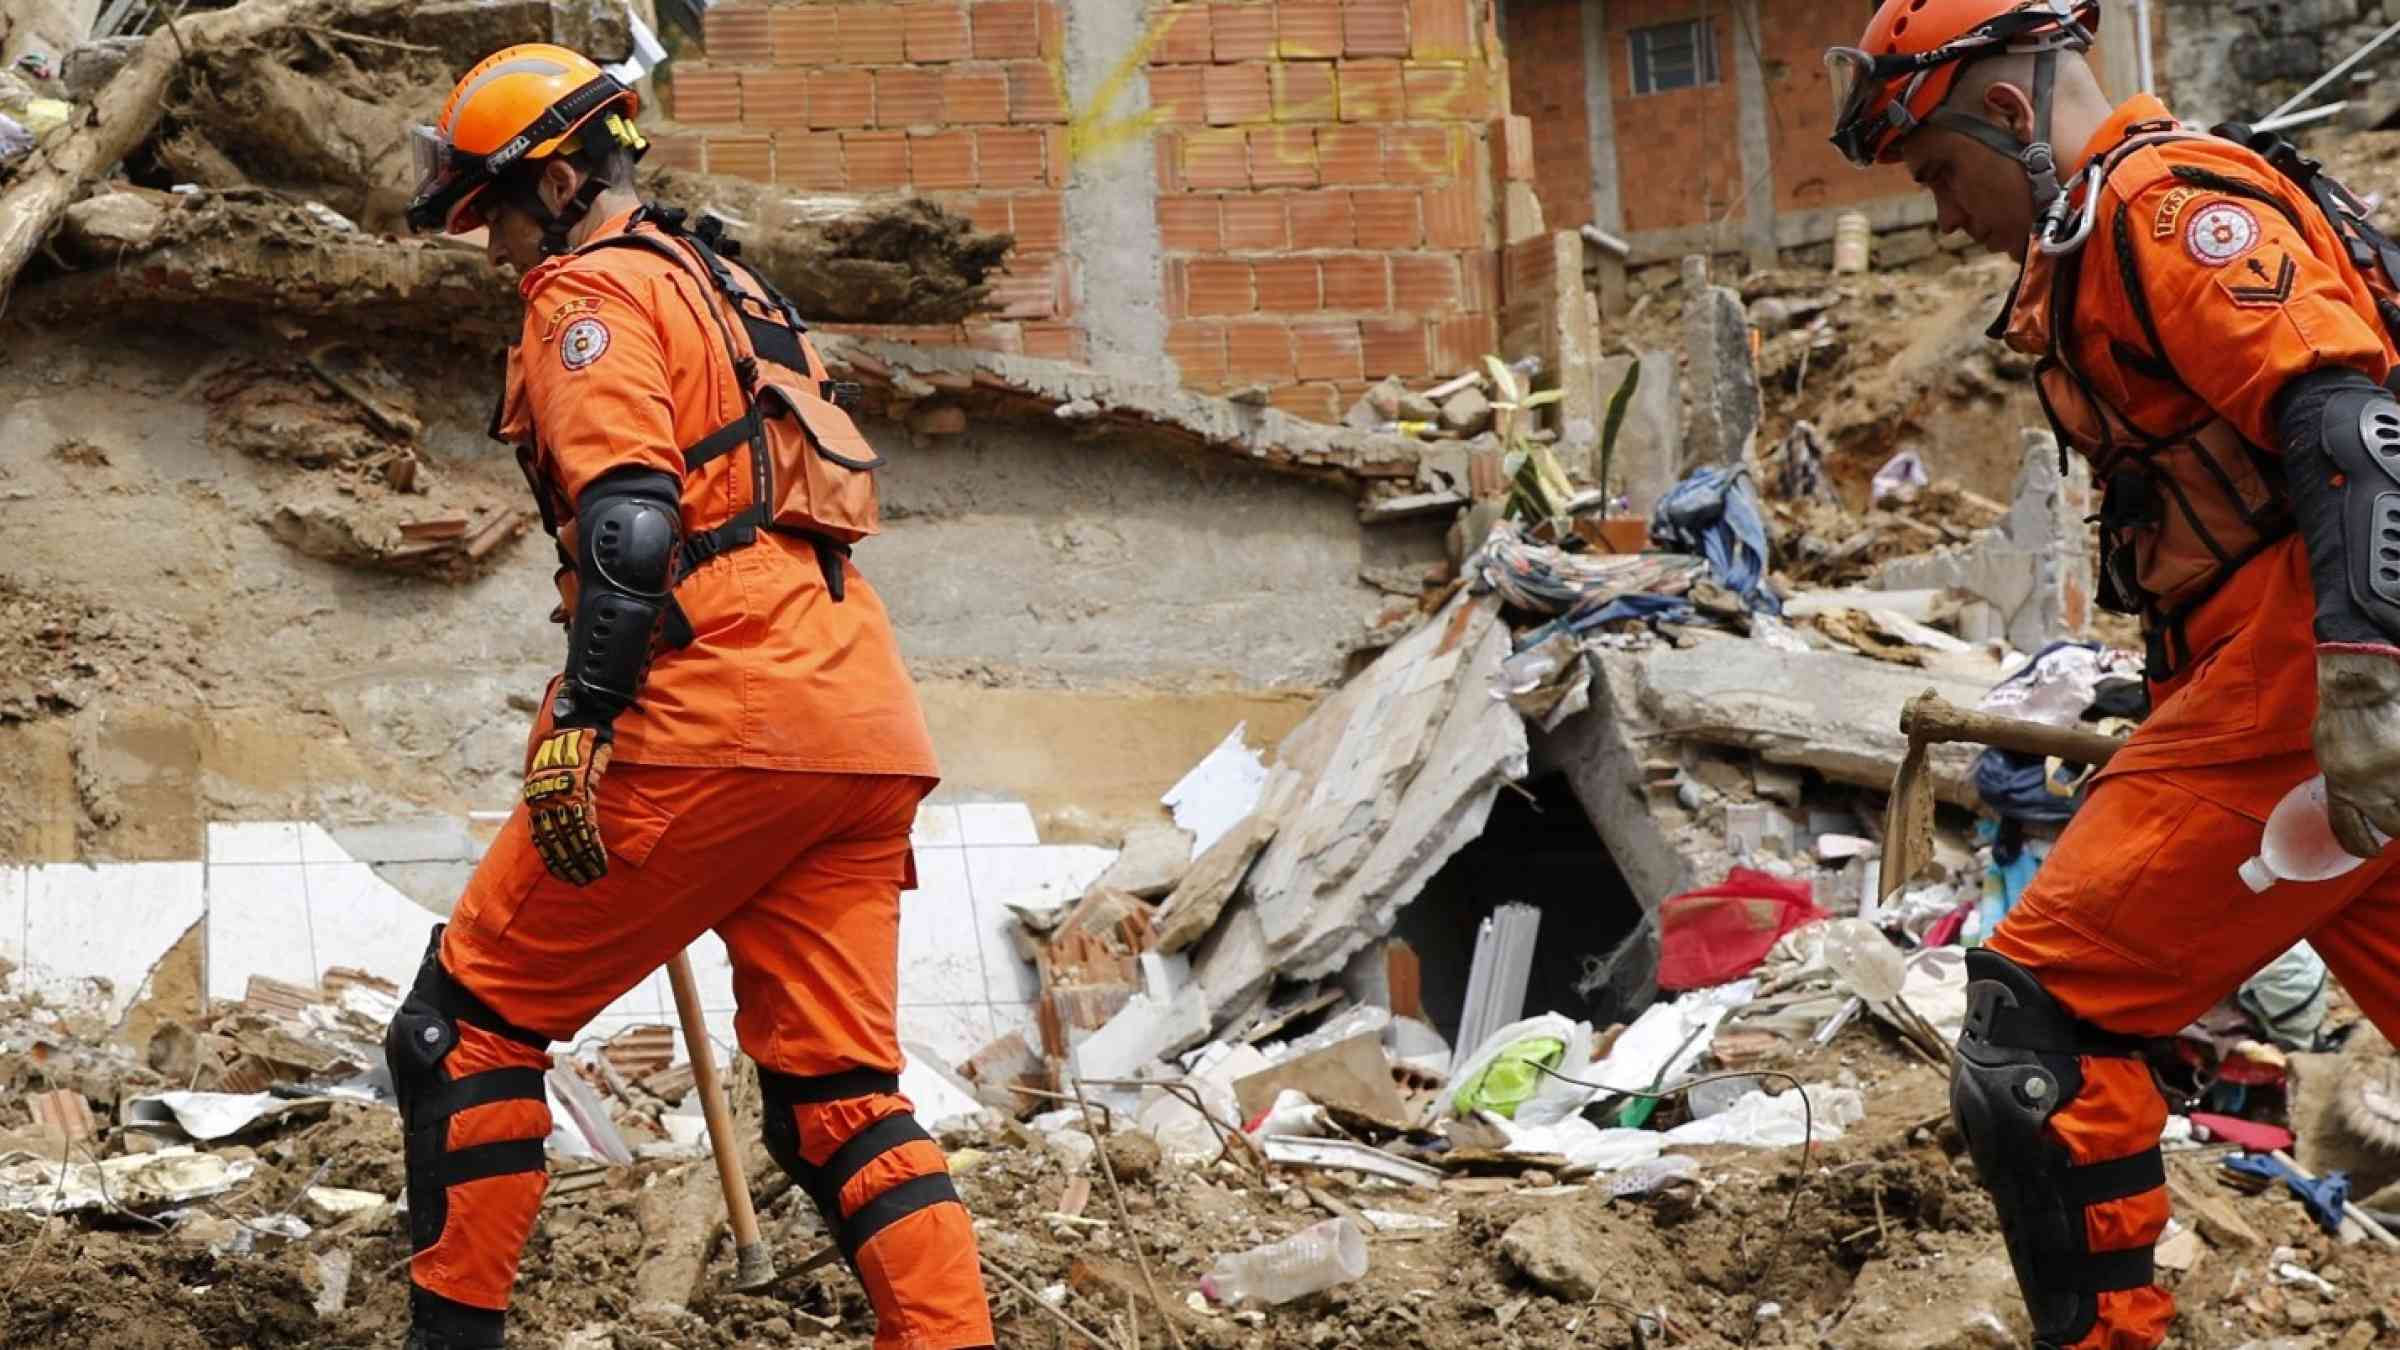 Firefighter teams conduct search and rescue for victims following a landslide and heavy rains in Petropolis city, Brazil, 25 February 2022